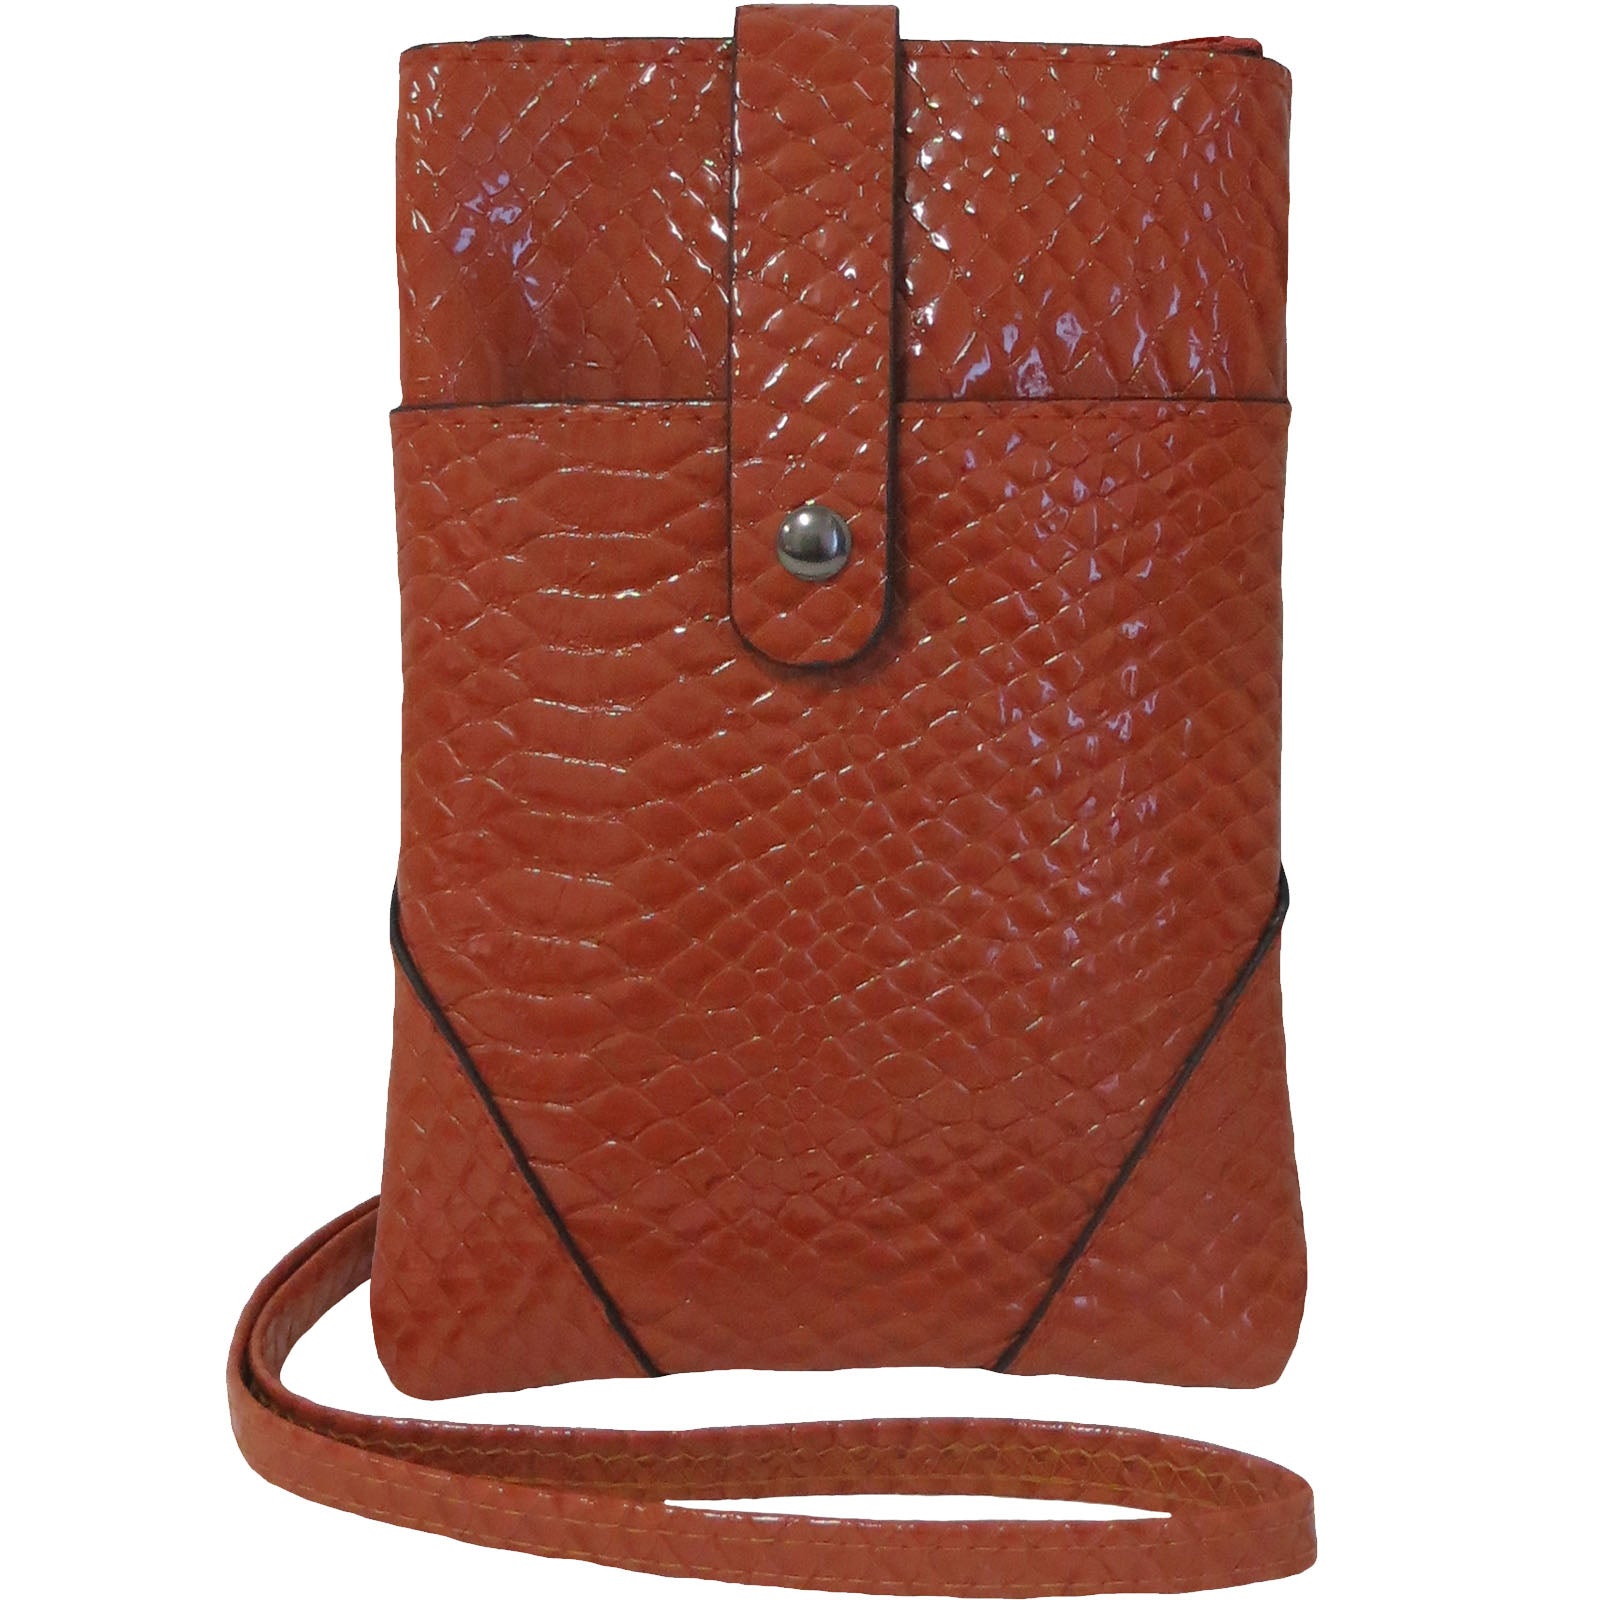 Wholesale Cross Body Bag with Phone Pocket in Rust Brown Snake Print - Alessa Leah